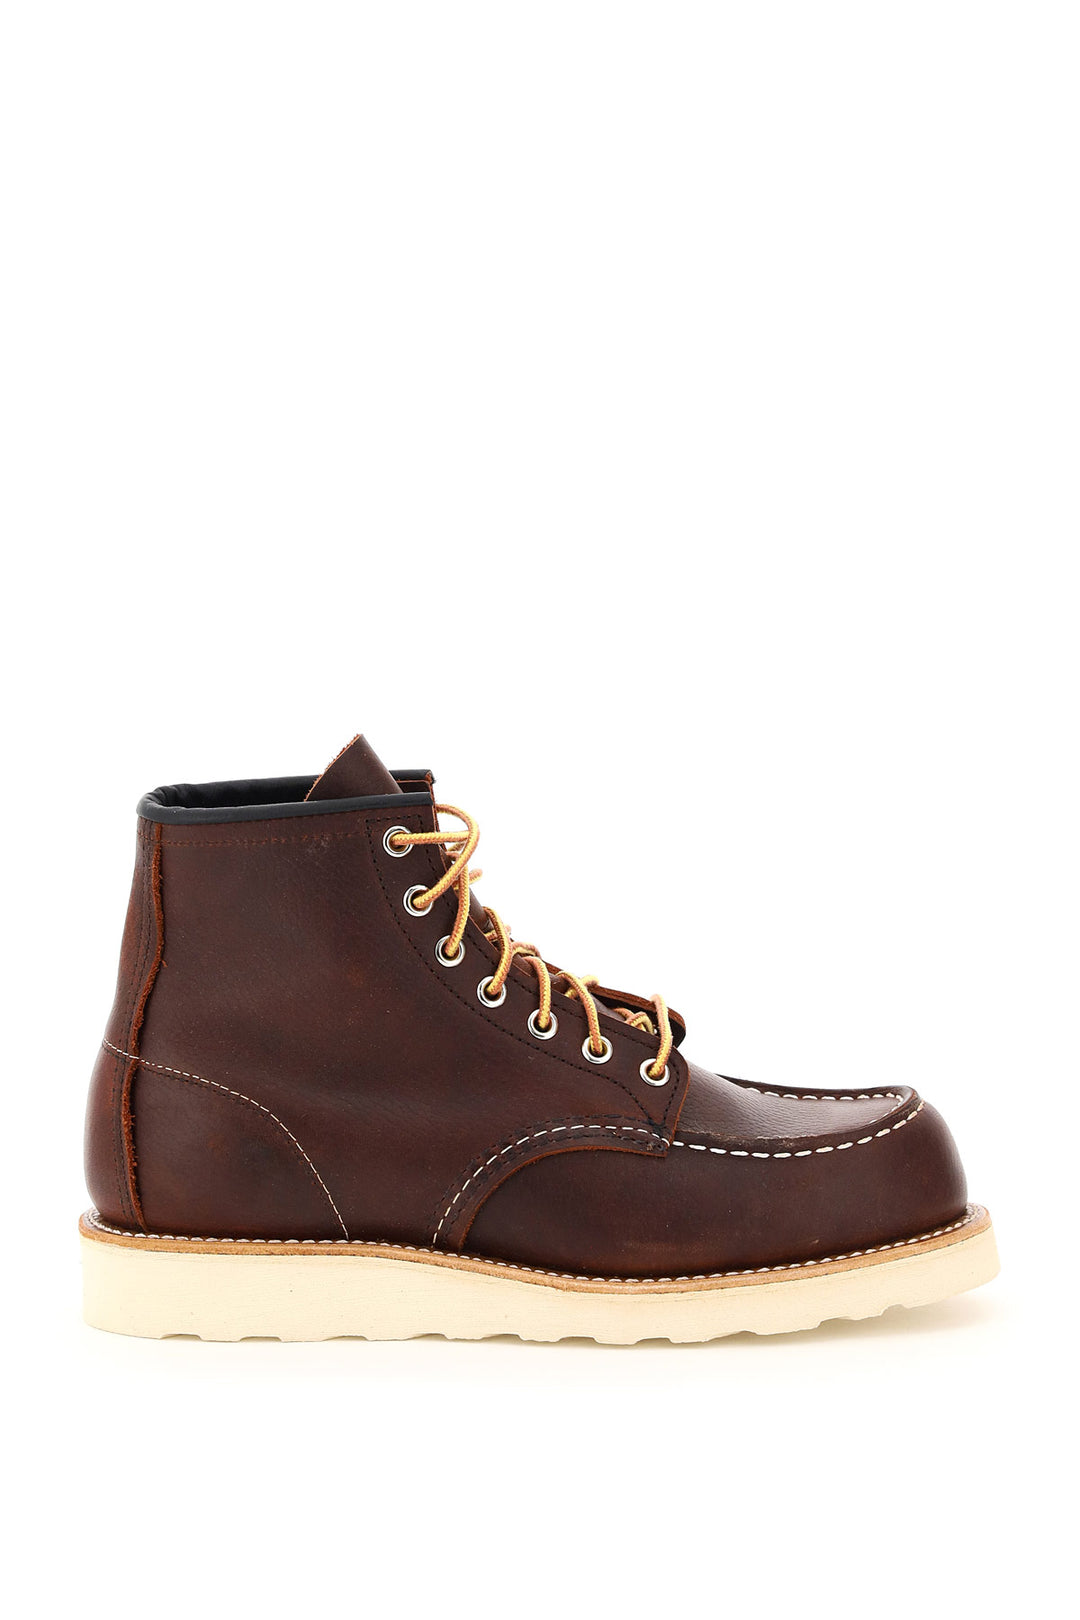 Scarponcino Classic Moc Toe - Red Wing Shoes - Uomo